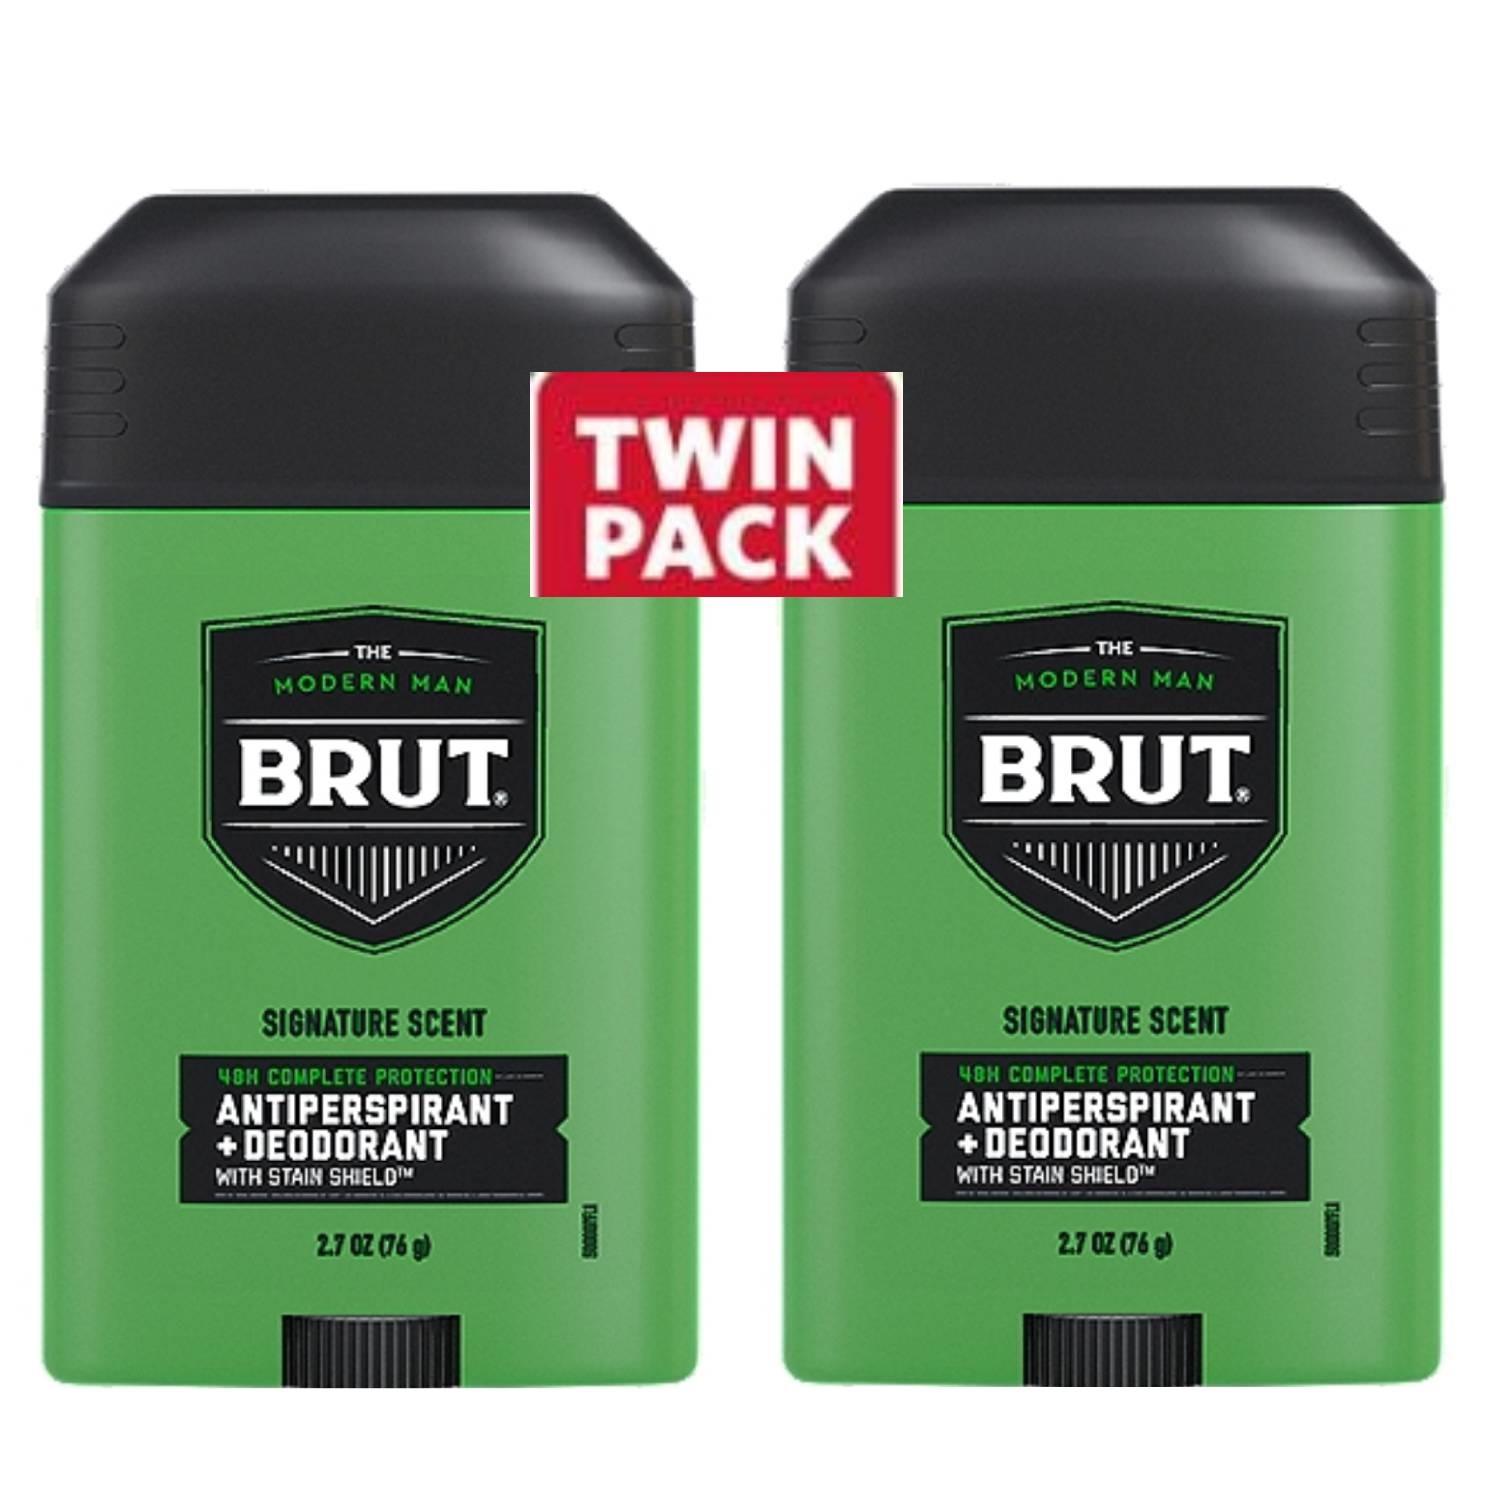 Brut - Signature Scent - 48H Deodorant with Stain shield | 76 g